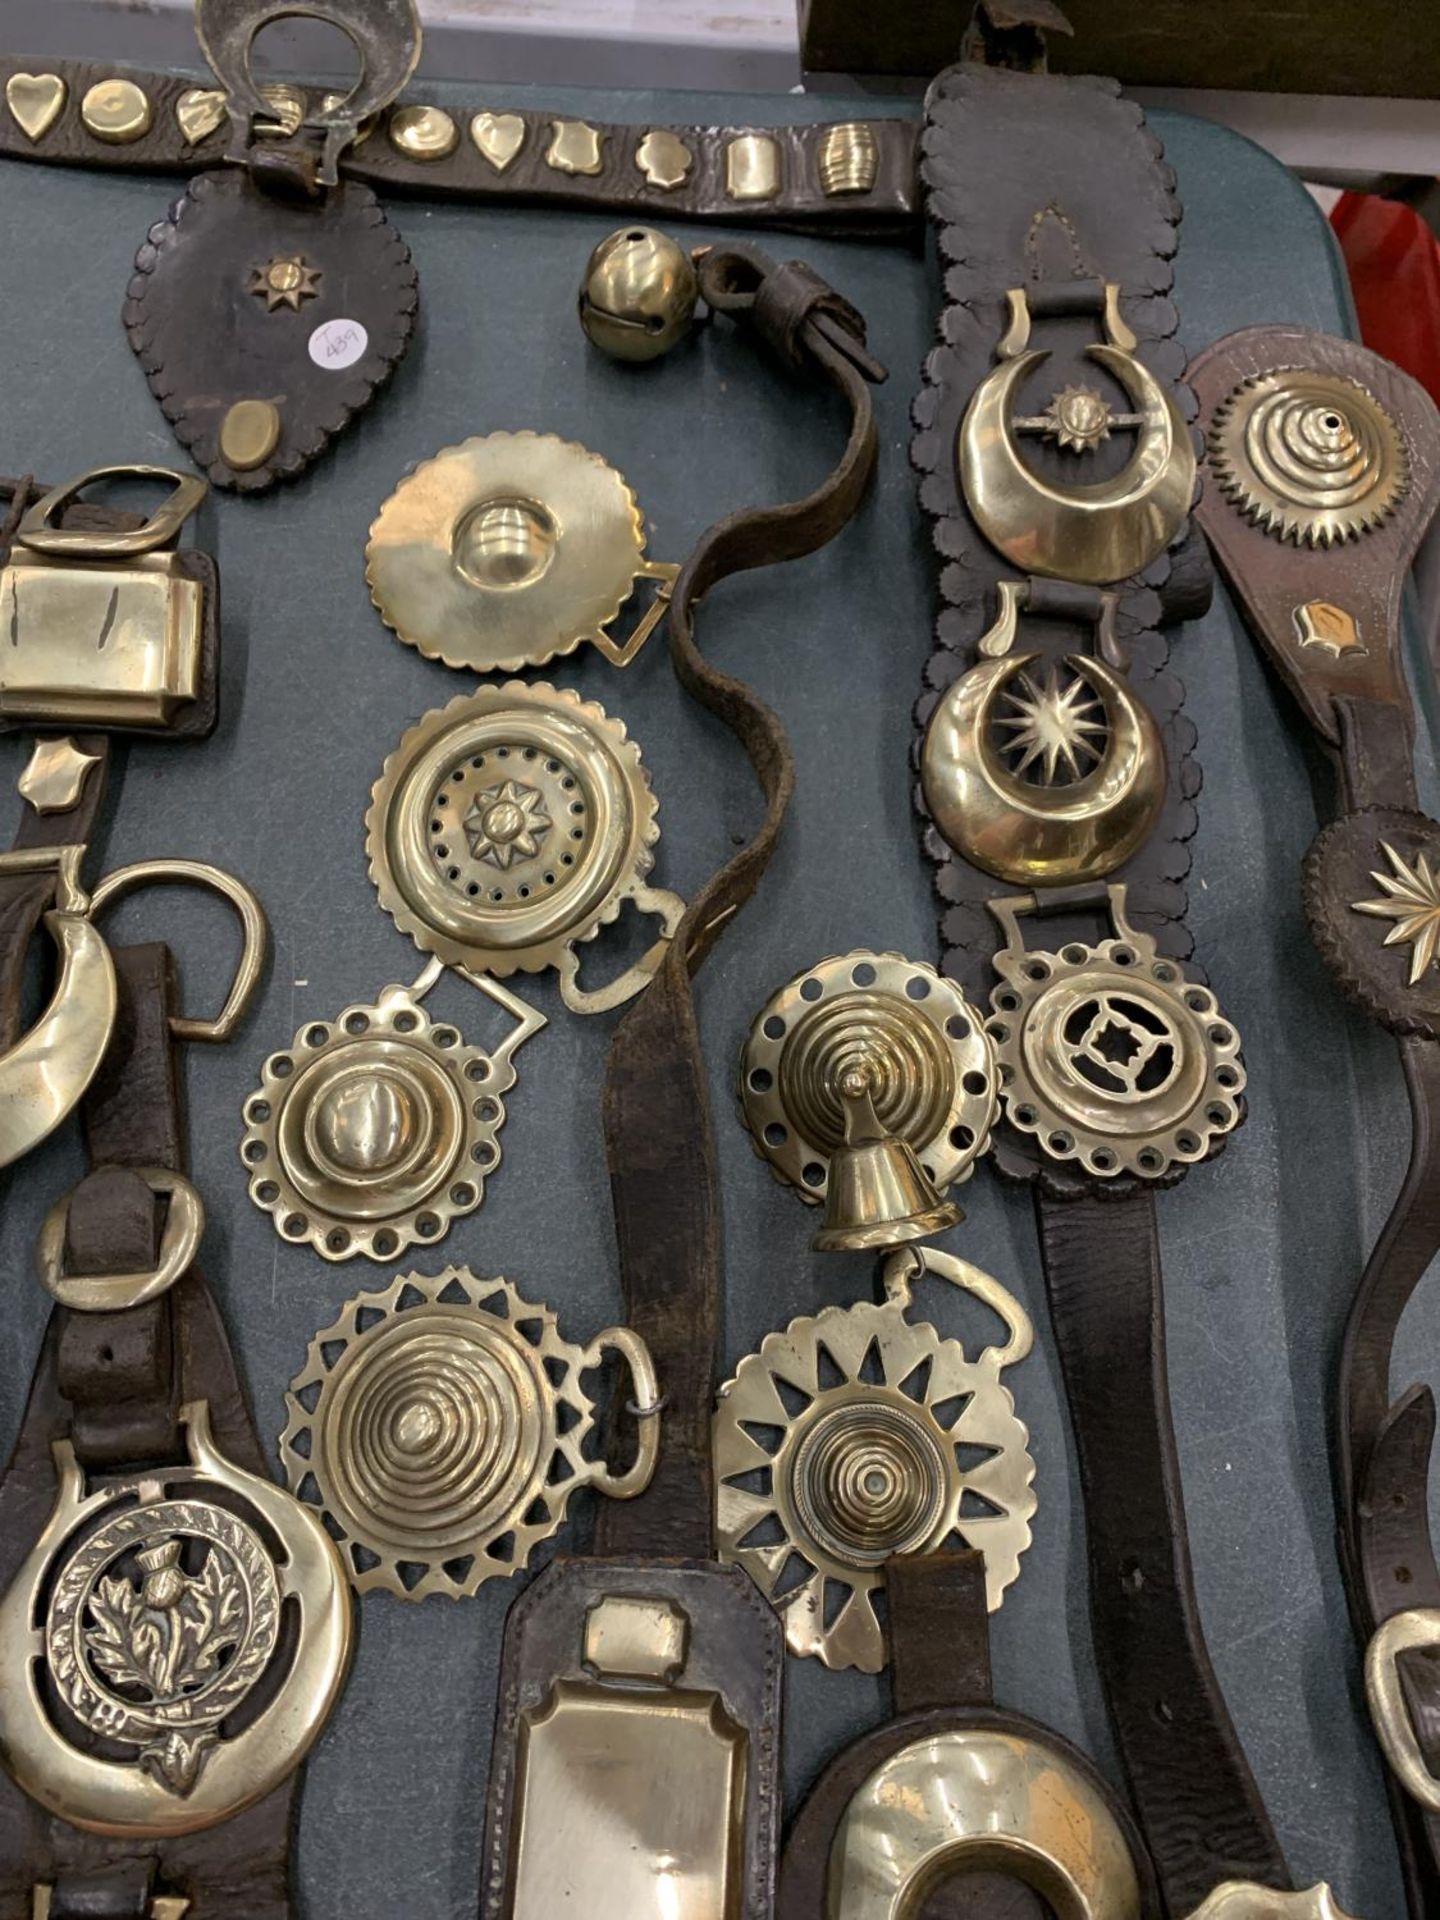 A LARGE COLLECTION OF HORSE BRASSES, SOME ON LEATHER STRAPS - Image 4 of 5